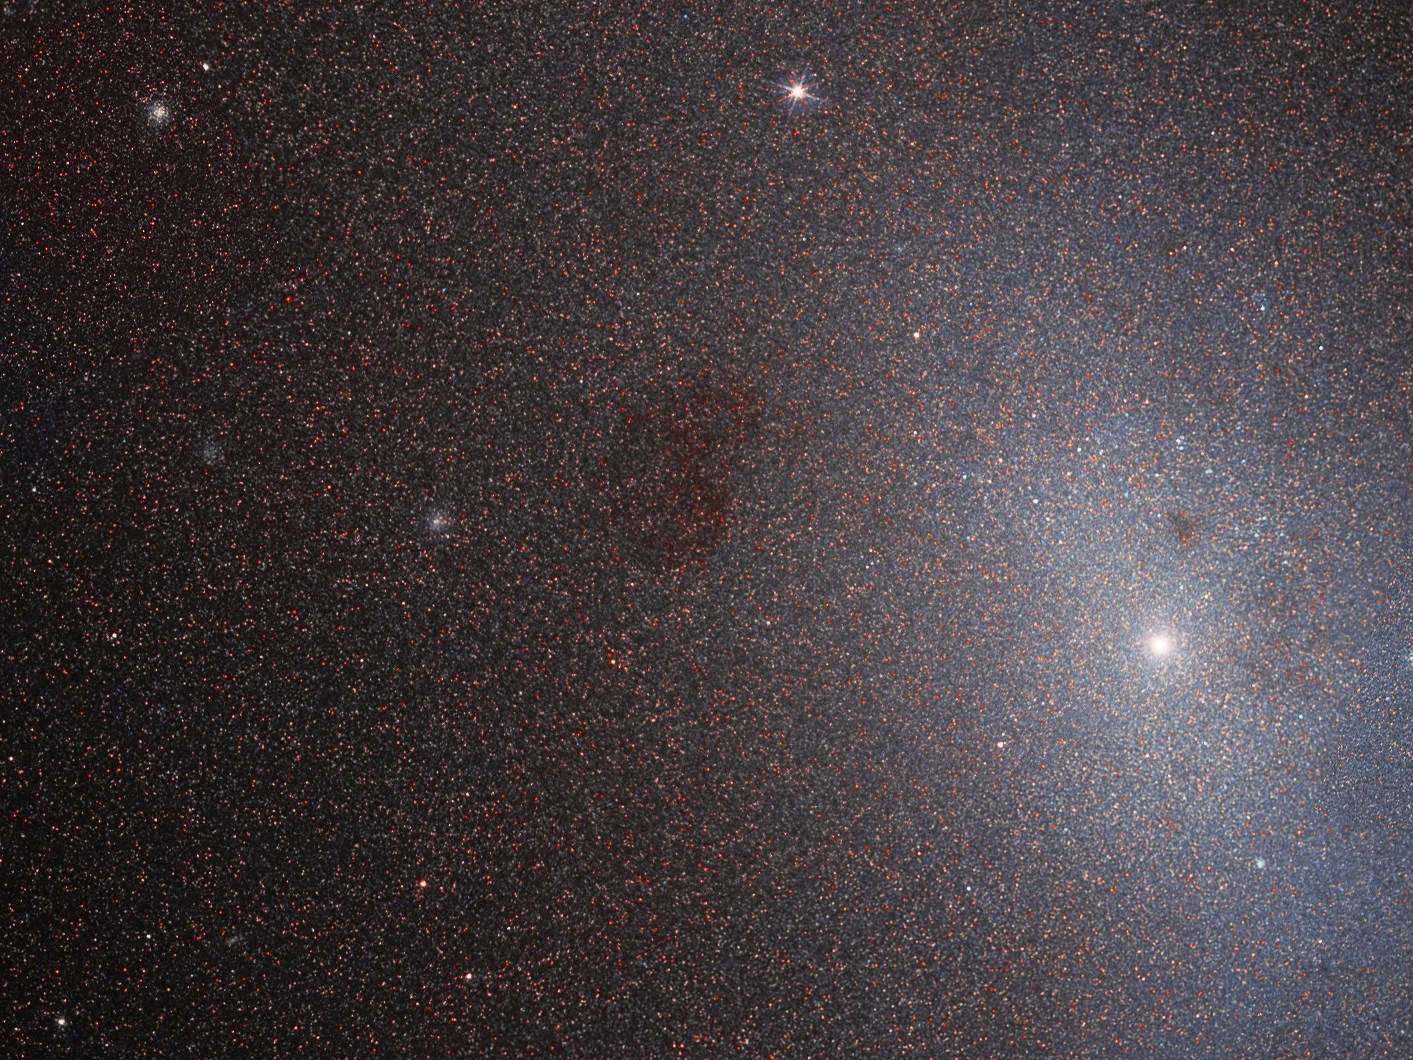 Hubble image of messier 110